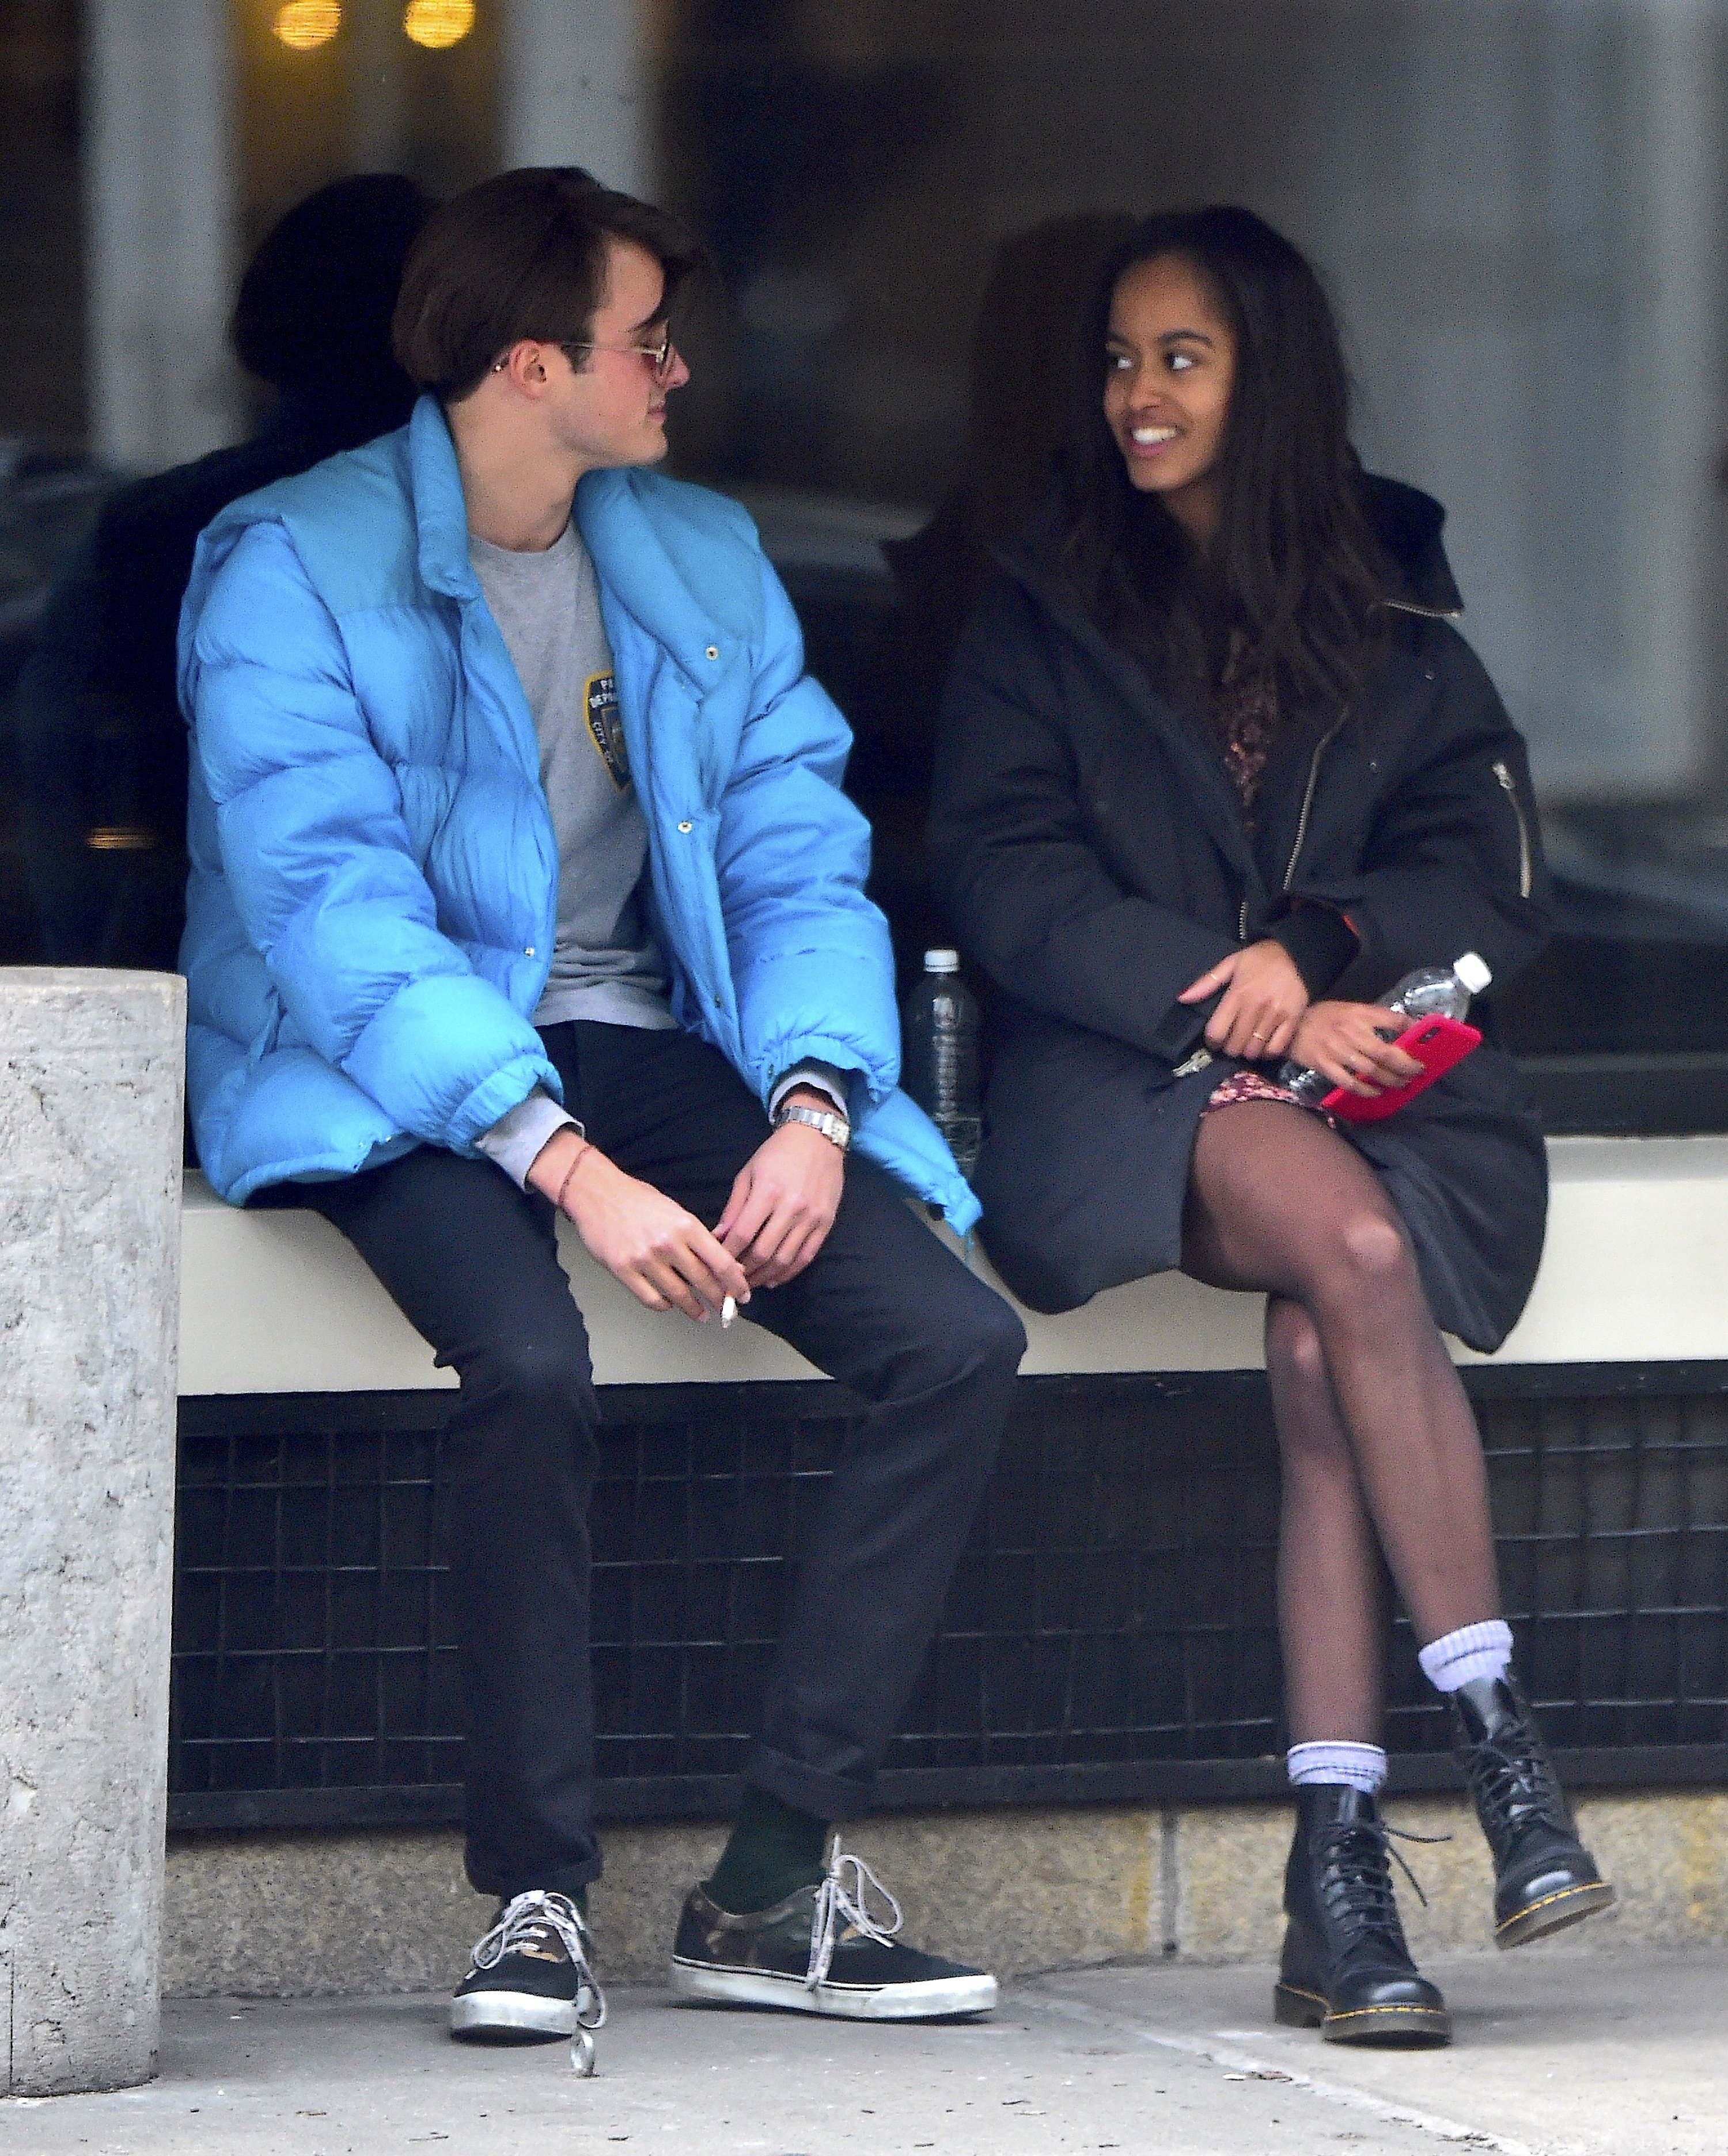 Malia Obama with boyfriend Rory Farquharson on January 20 2018 in New York City | Source: Getty Images